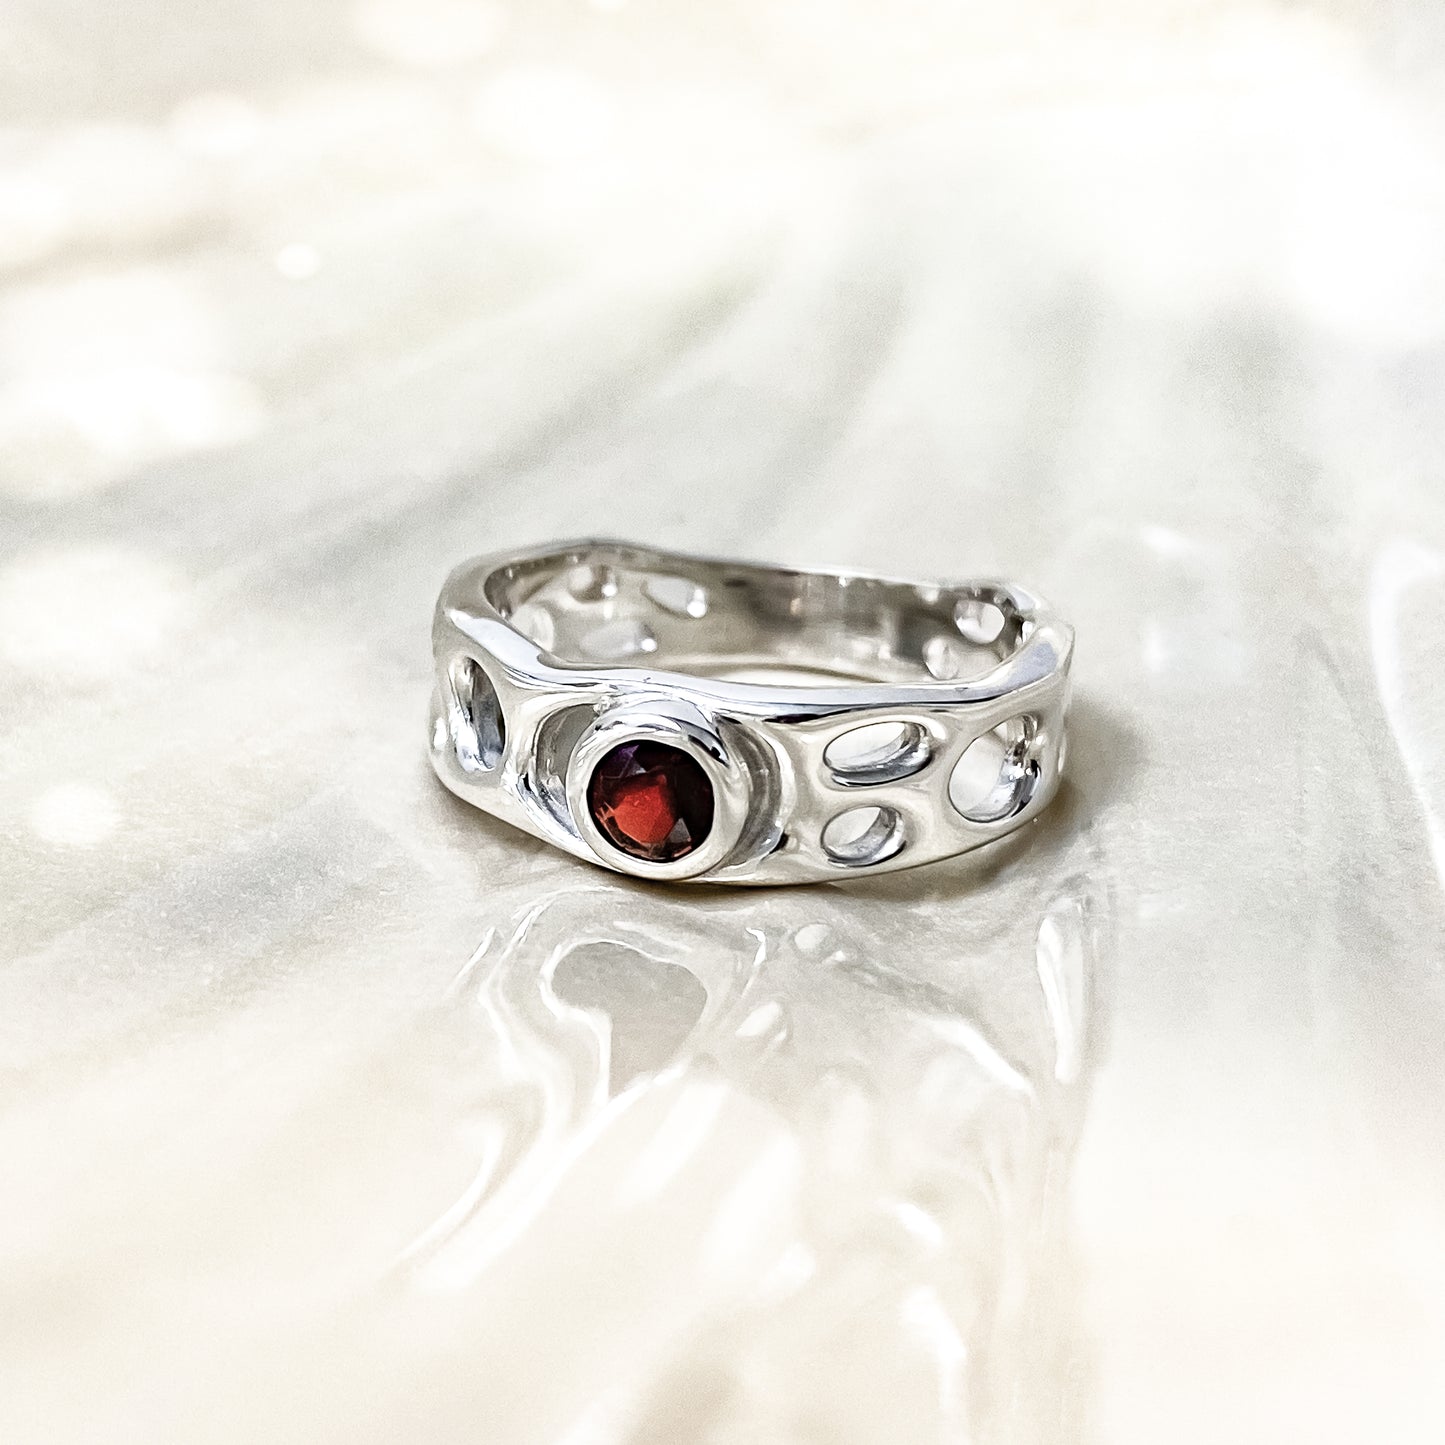 Sterling Silver Infinity Ring with Garnet